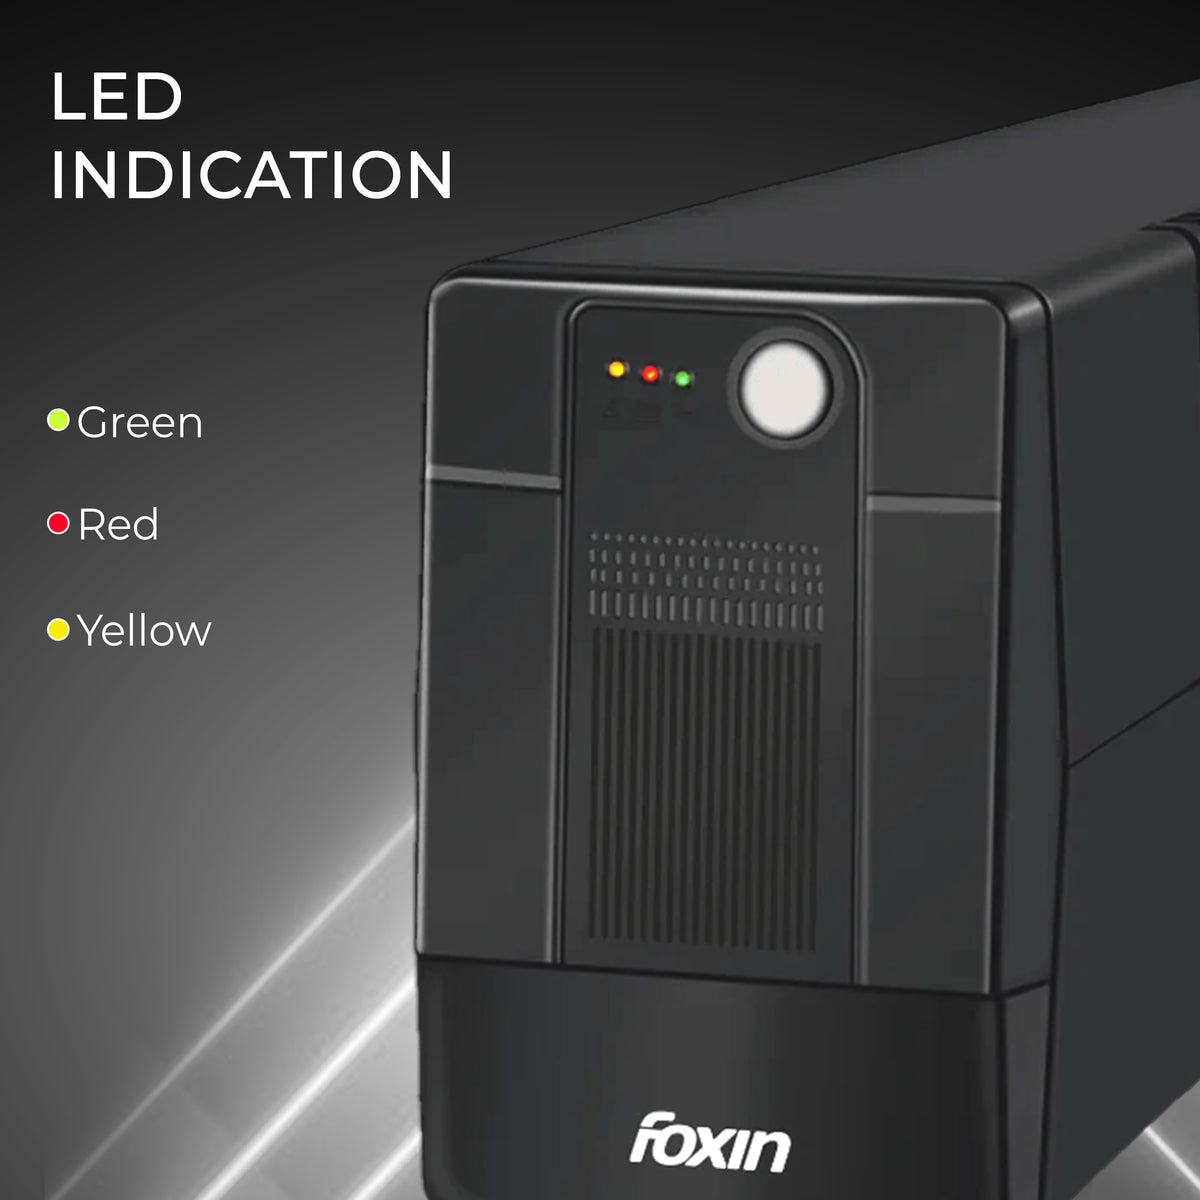 Foxin FPS-1001 Uninterrupted Power Supply (UPS), with 1000VA/360Watt Cold-Start Functionality